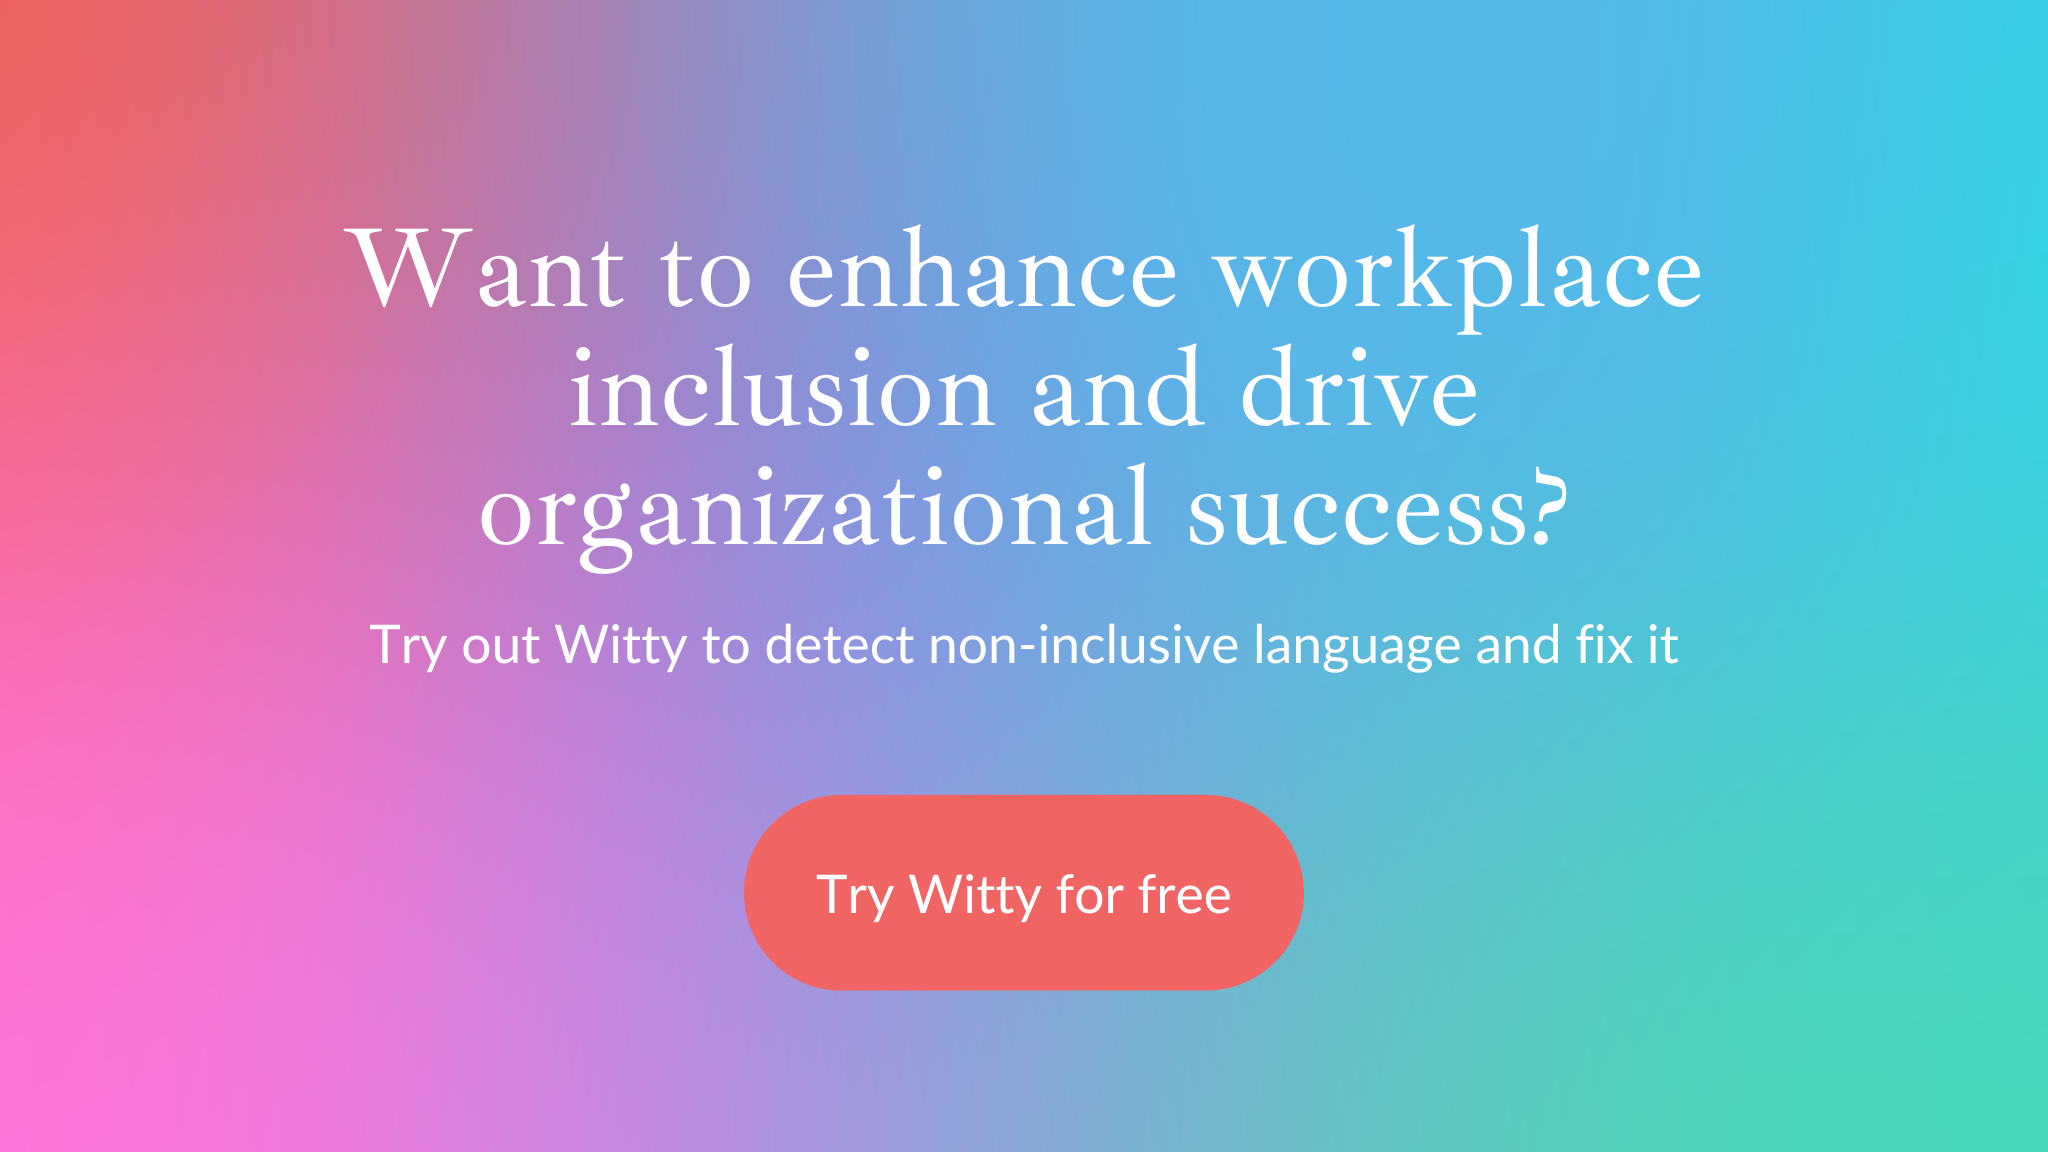 Want to enhance workplace inclusion and drive organizational success? Try out Witty for free.